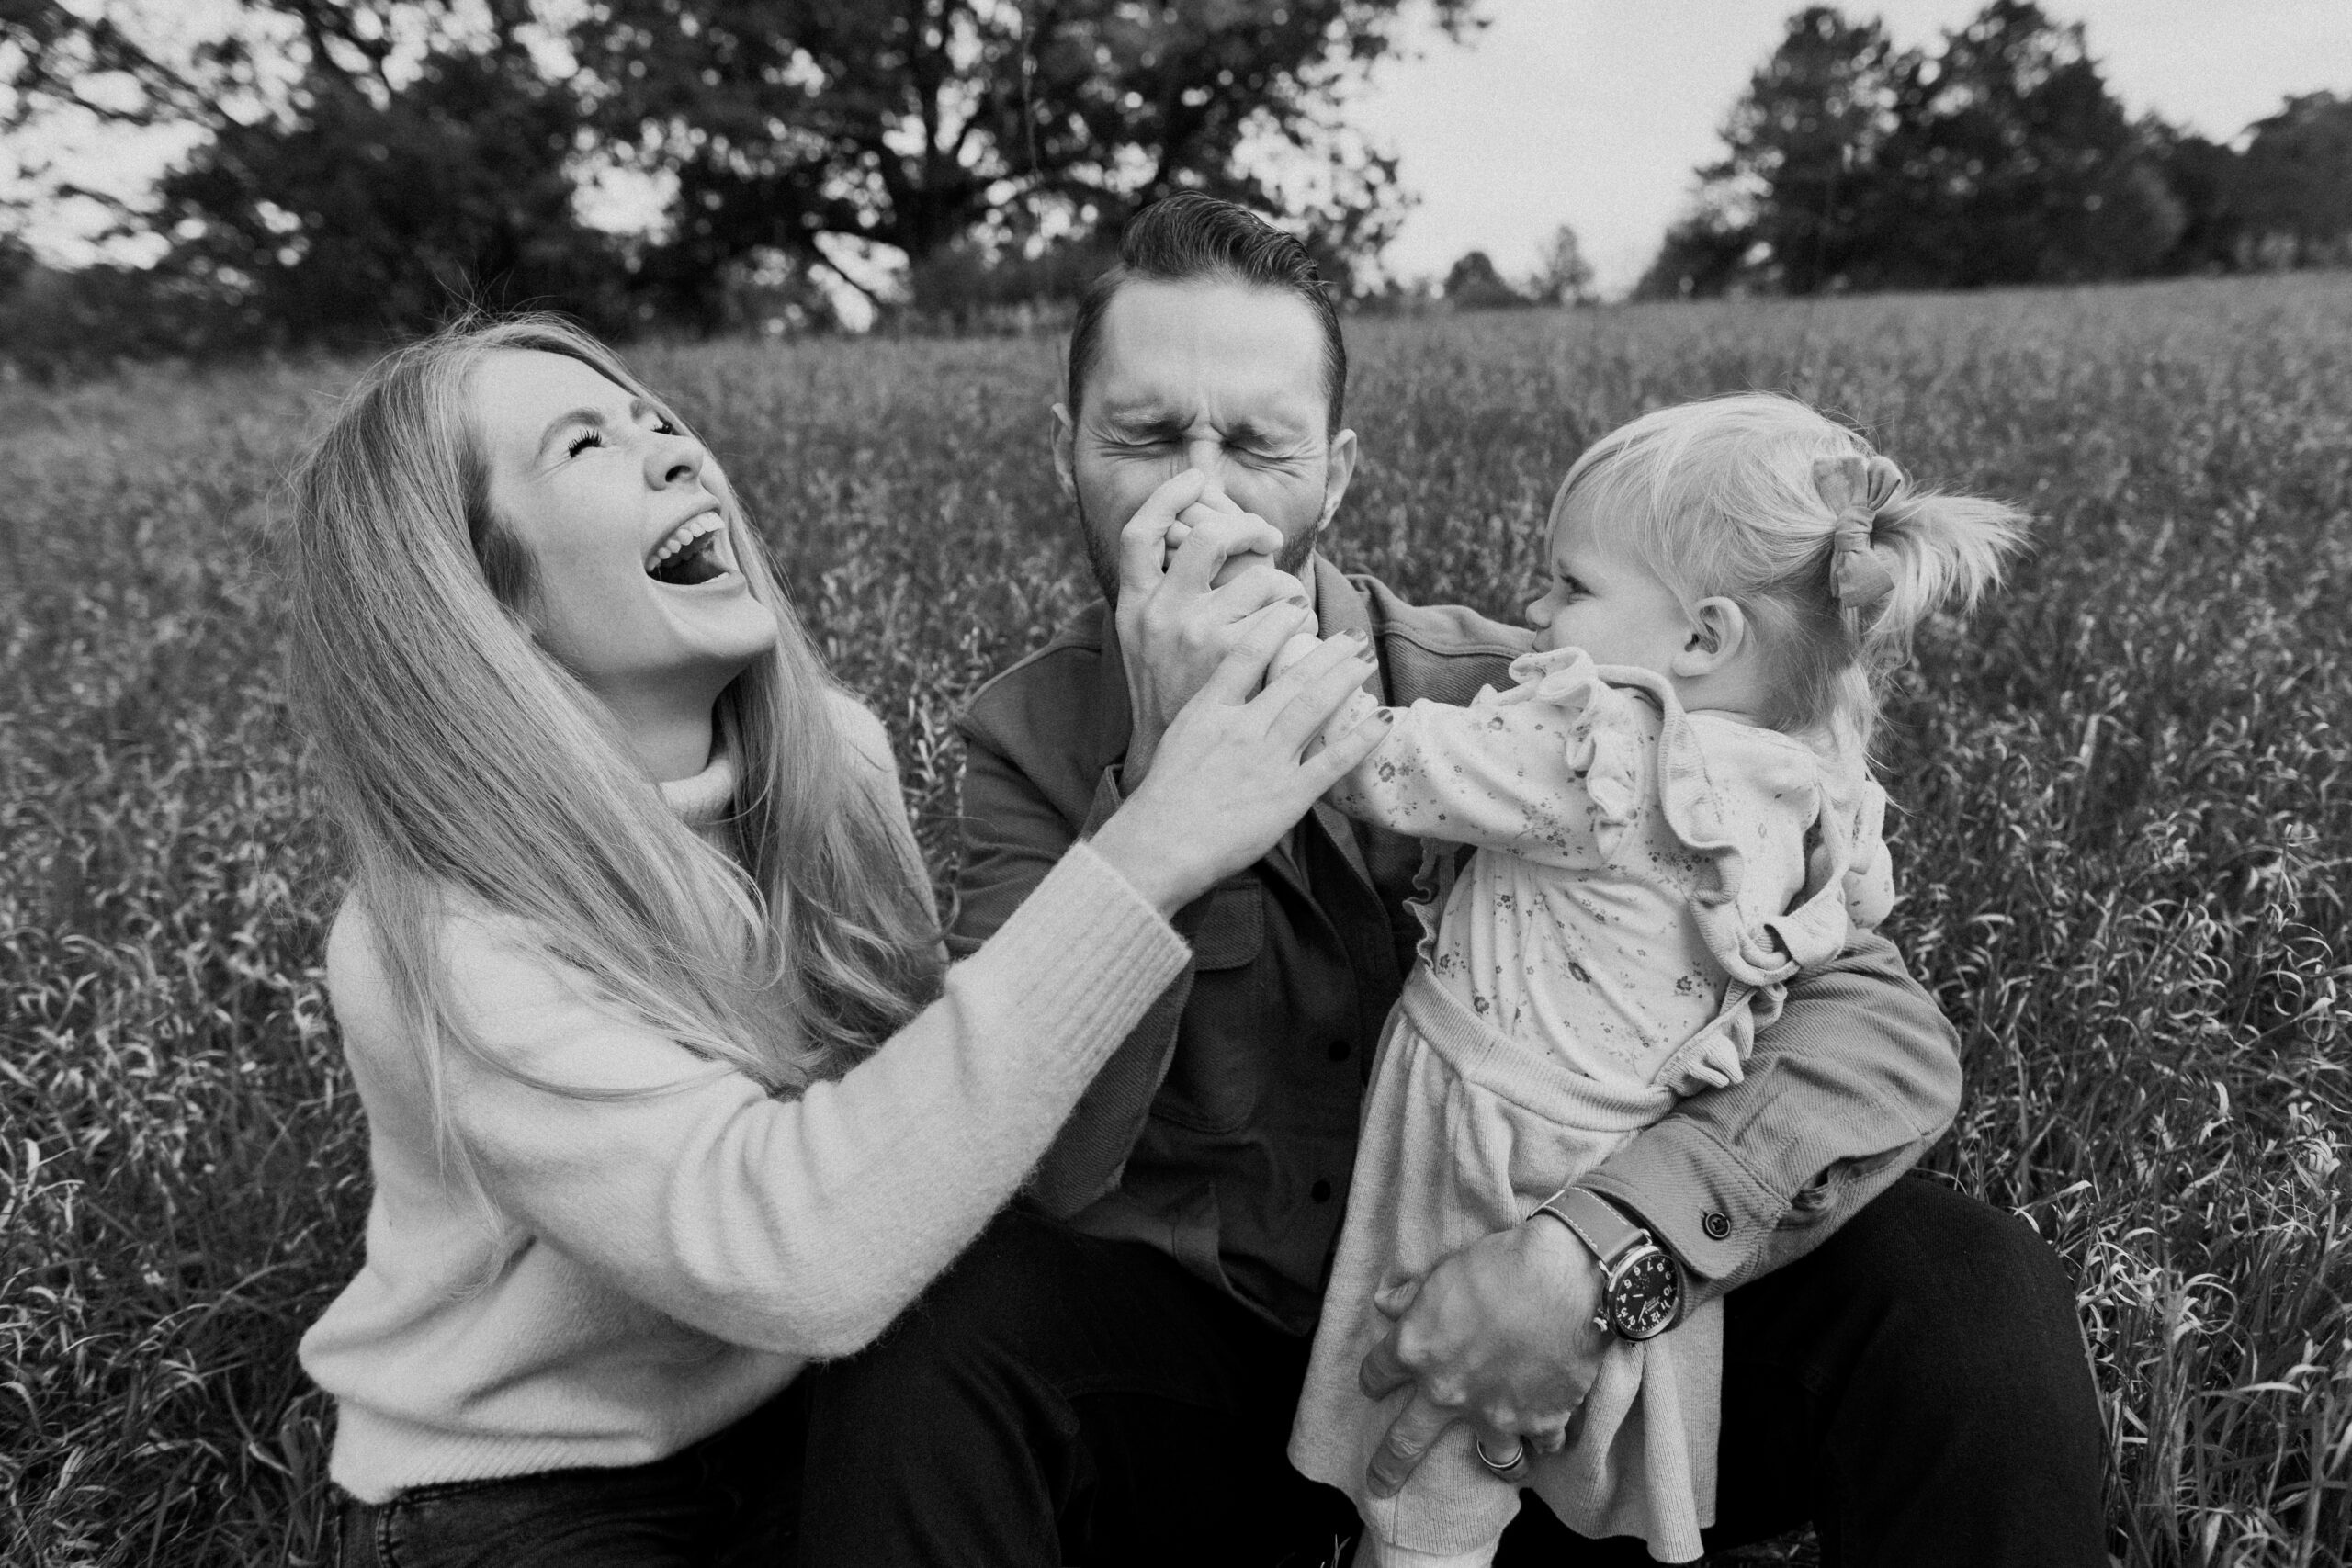 Husband and wife photography team in Ann Arbor, Michigan with their daughter